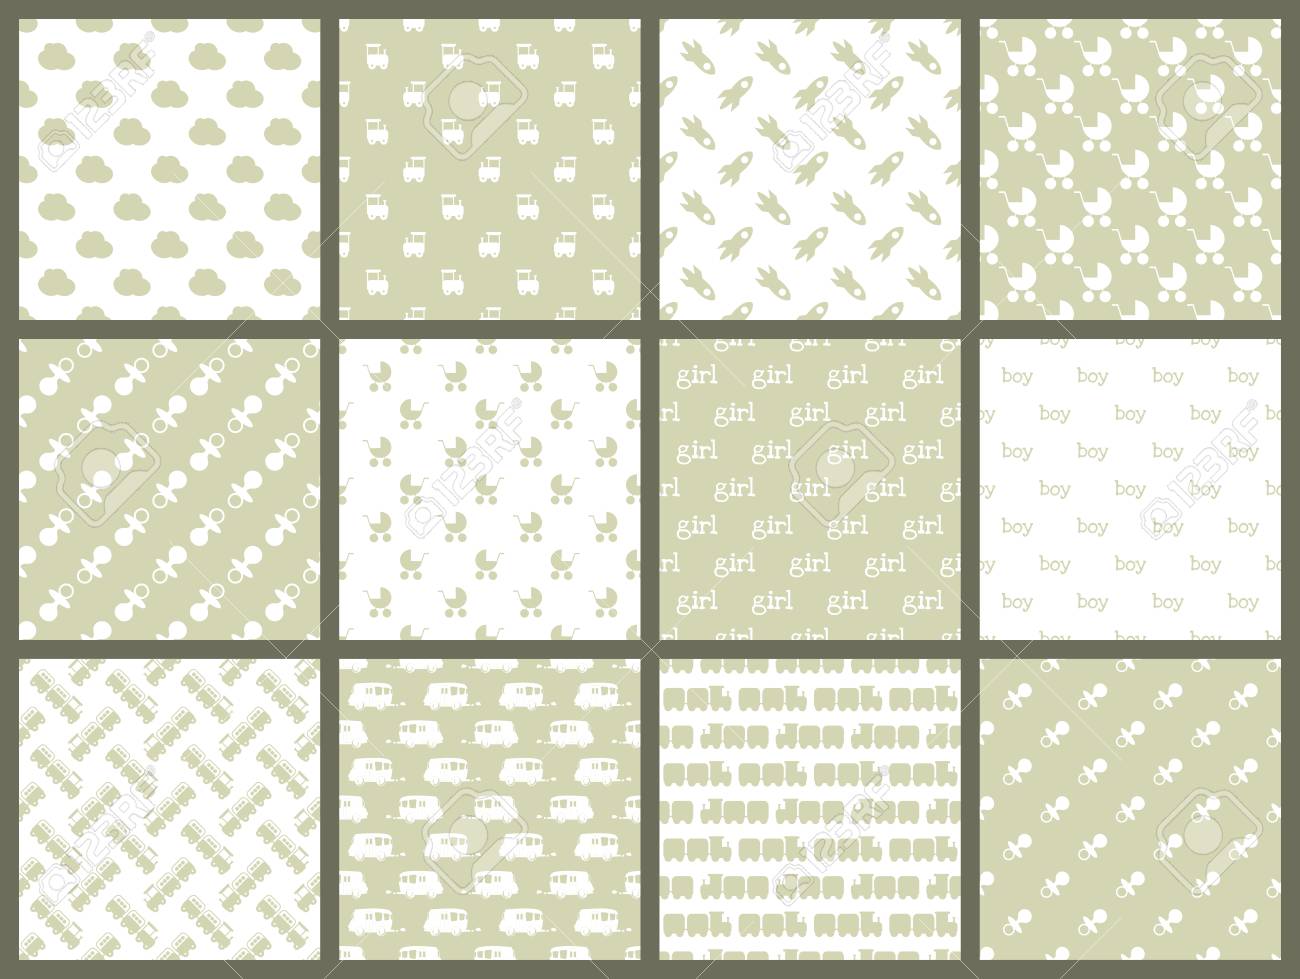 Baby Shower Toys Seamless Pattern Background Vector Cute Wallpaper